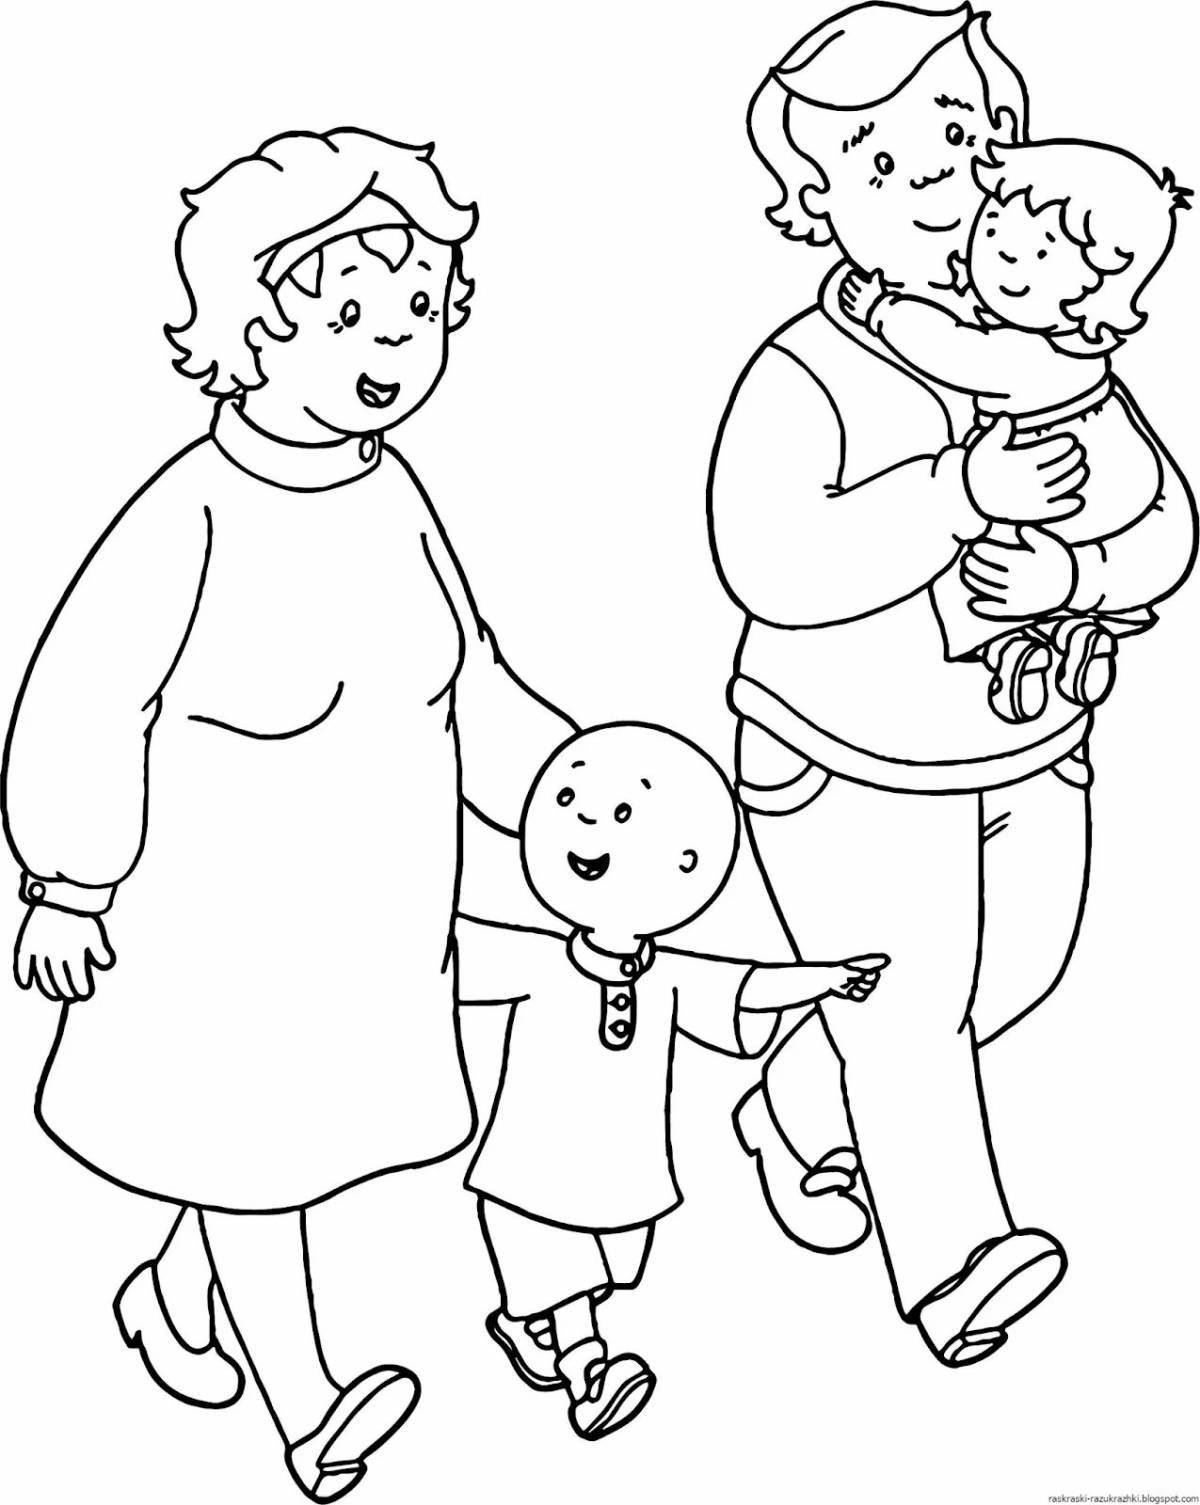 Relaxing mom and dad coloring book for kids